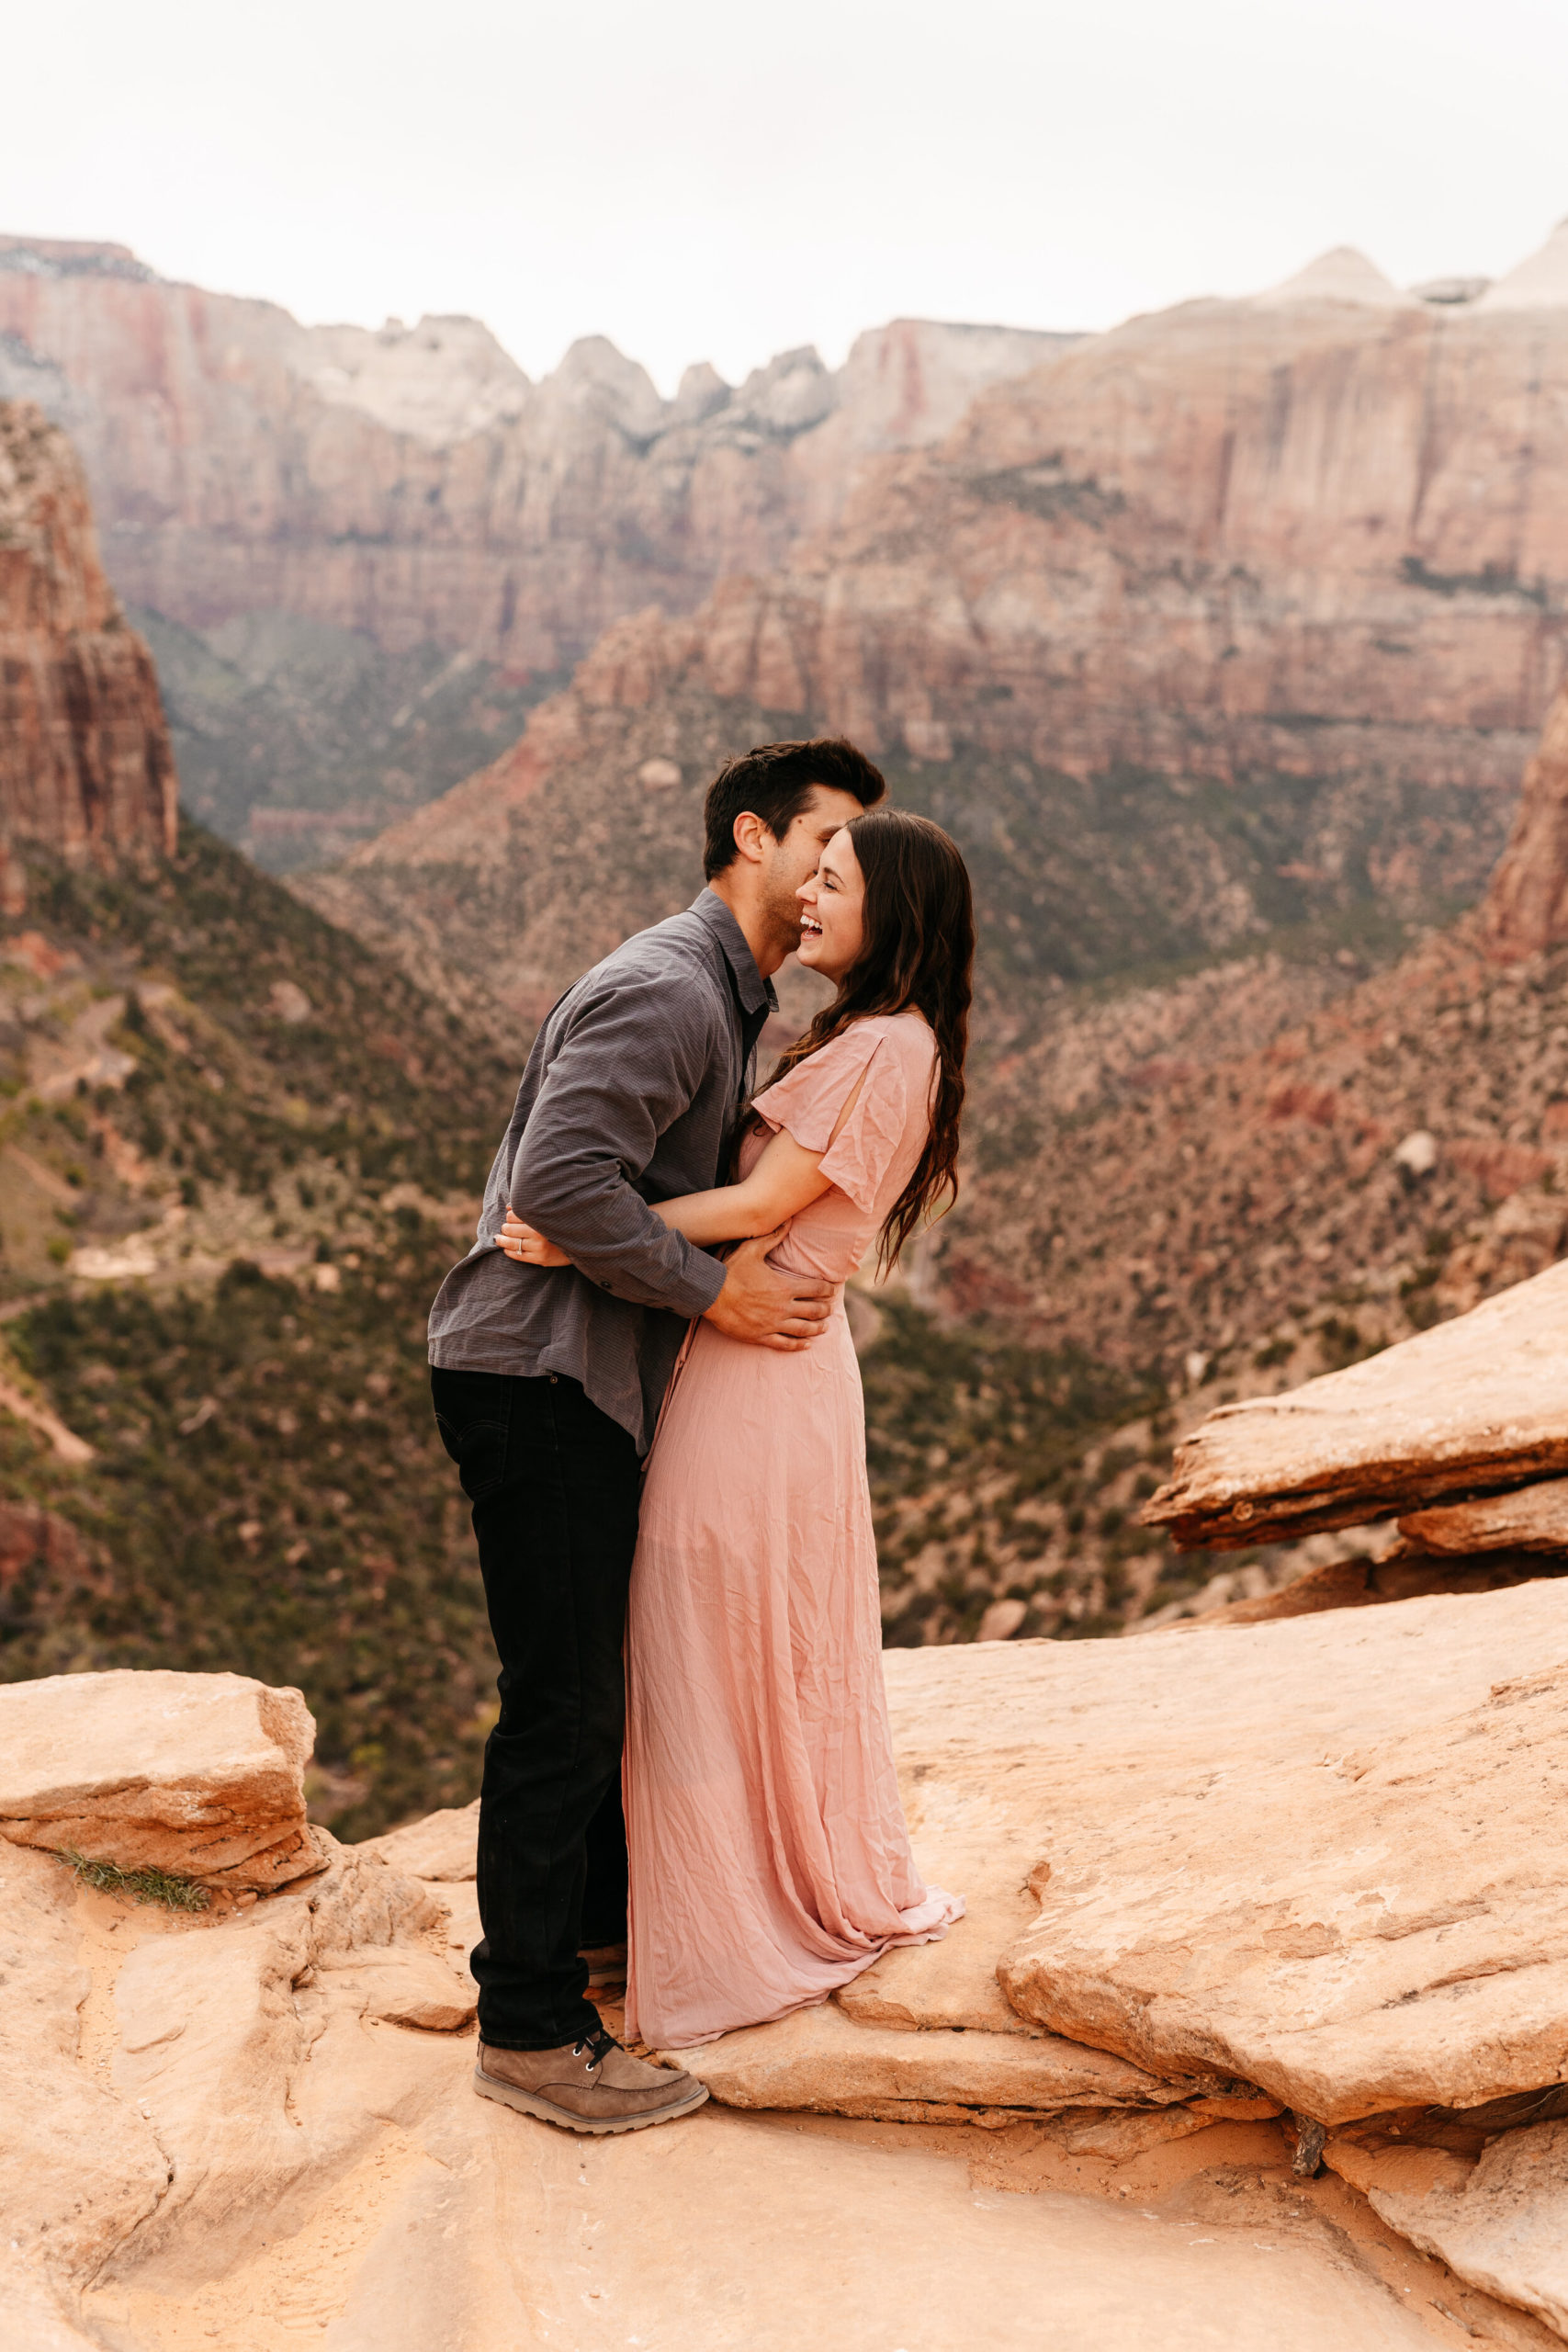 Kylee + Andrew - Zion National Park, Utah Canyon Overlook Adventure Session21.jpg